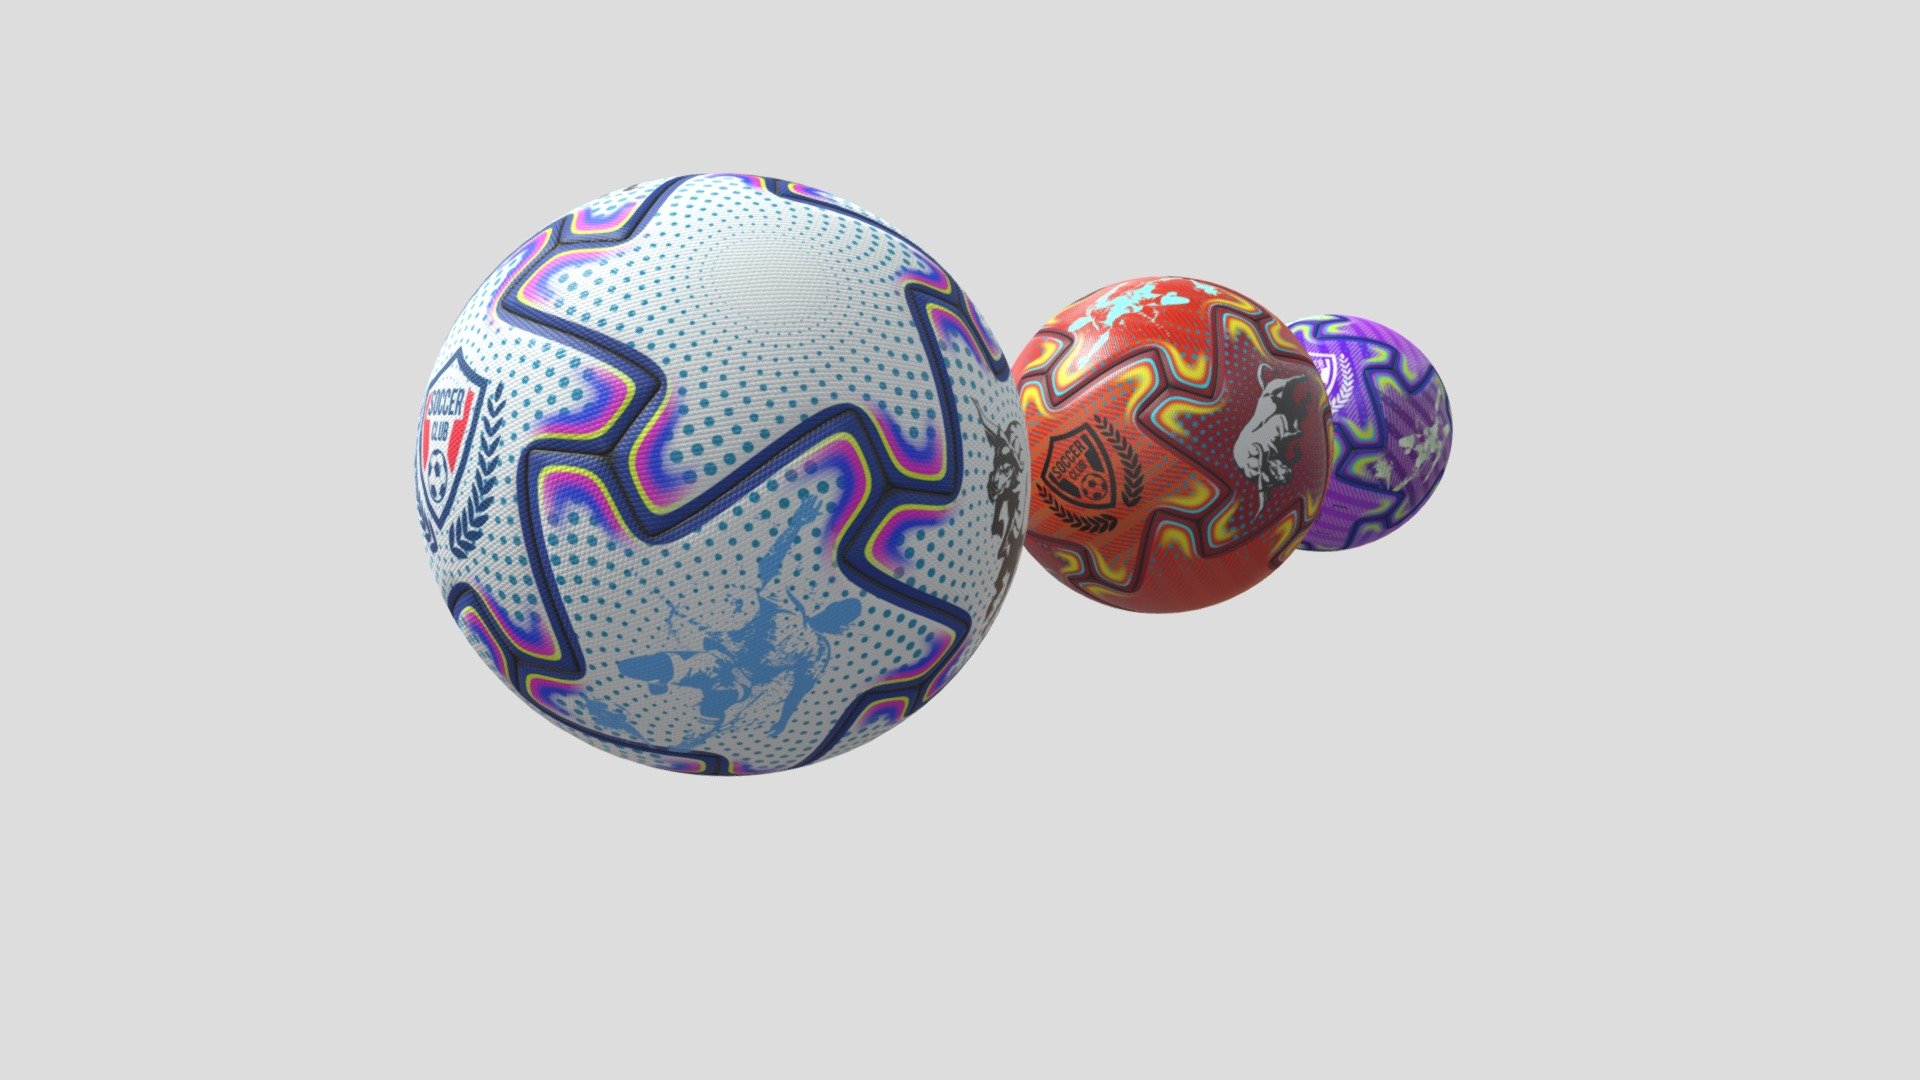 My Soccer Match Ball Design
Substance file version 9.0.0 attached as an additional file (bottom of downloading list) with all layers
You can make any your personal design, colors, surfaces and decals - Soccer Ball Design - With Substance file - Buy Royalty Free 3D model by VRA (@architect47) 3d model